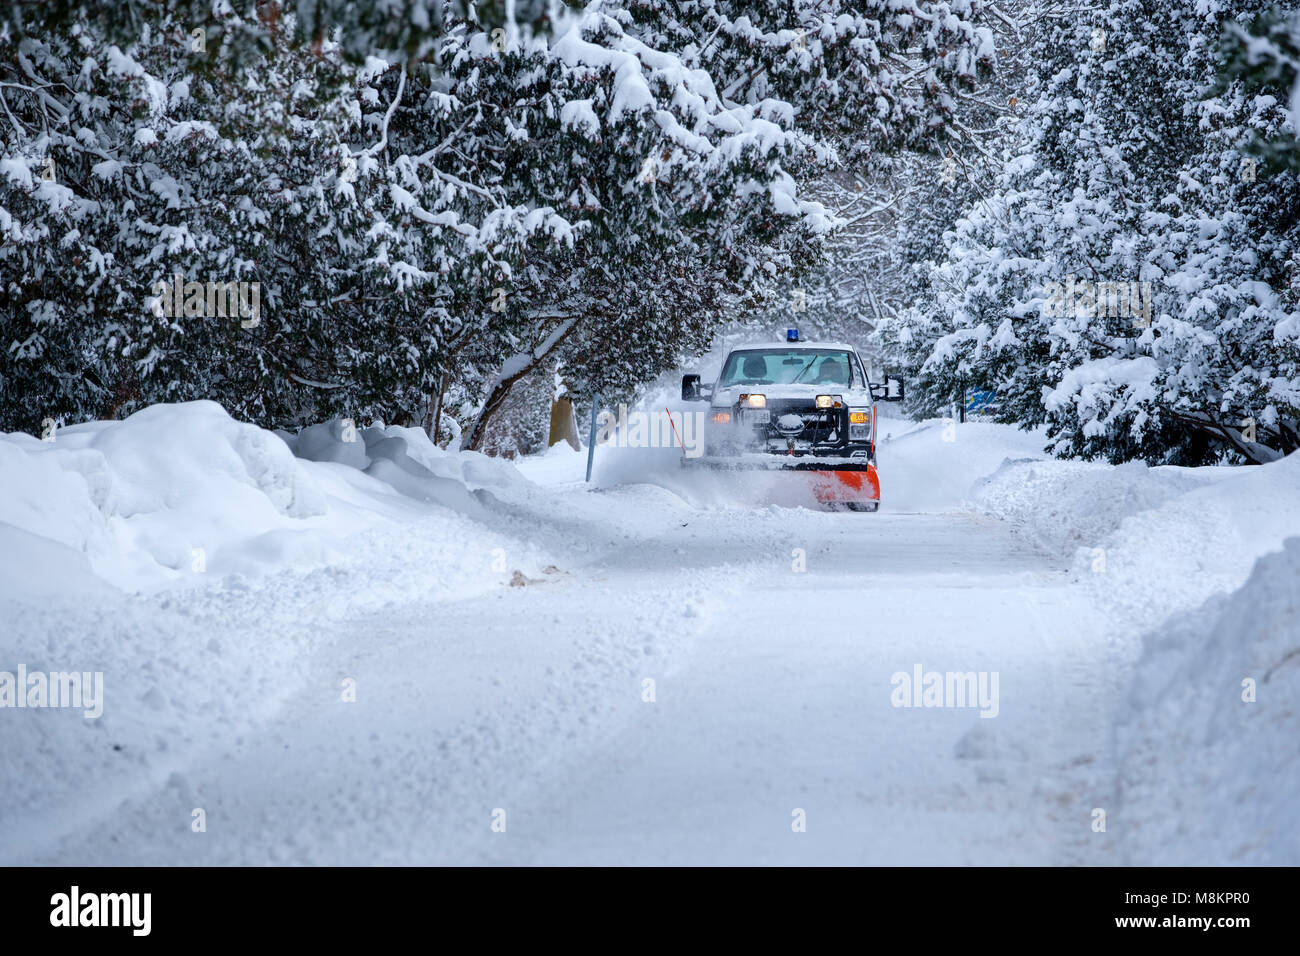 Snow plow pick-up truck in motion clearing a municipal road, street, after heavy snowfall at Springbank Park, London, Ontario, Canada. Stock Photo